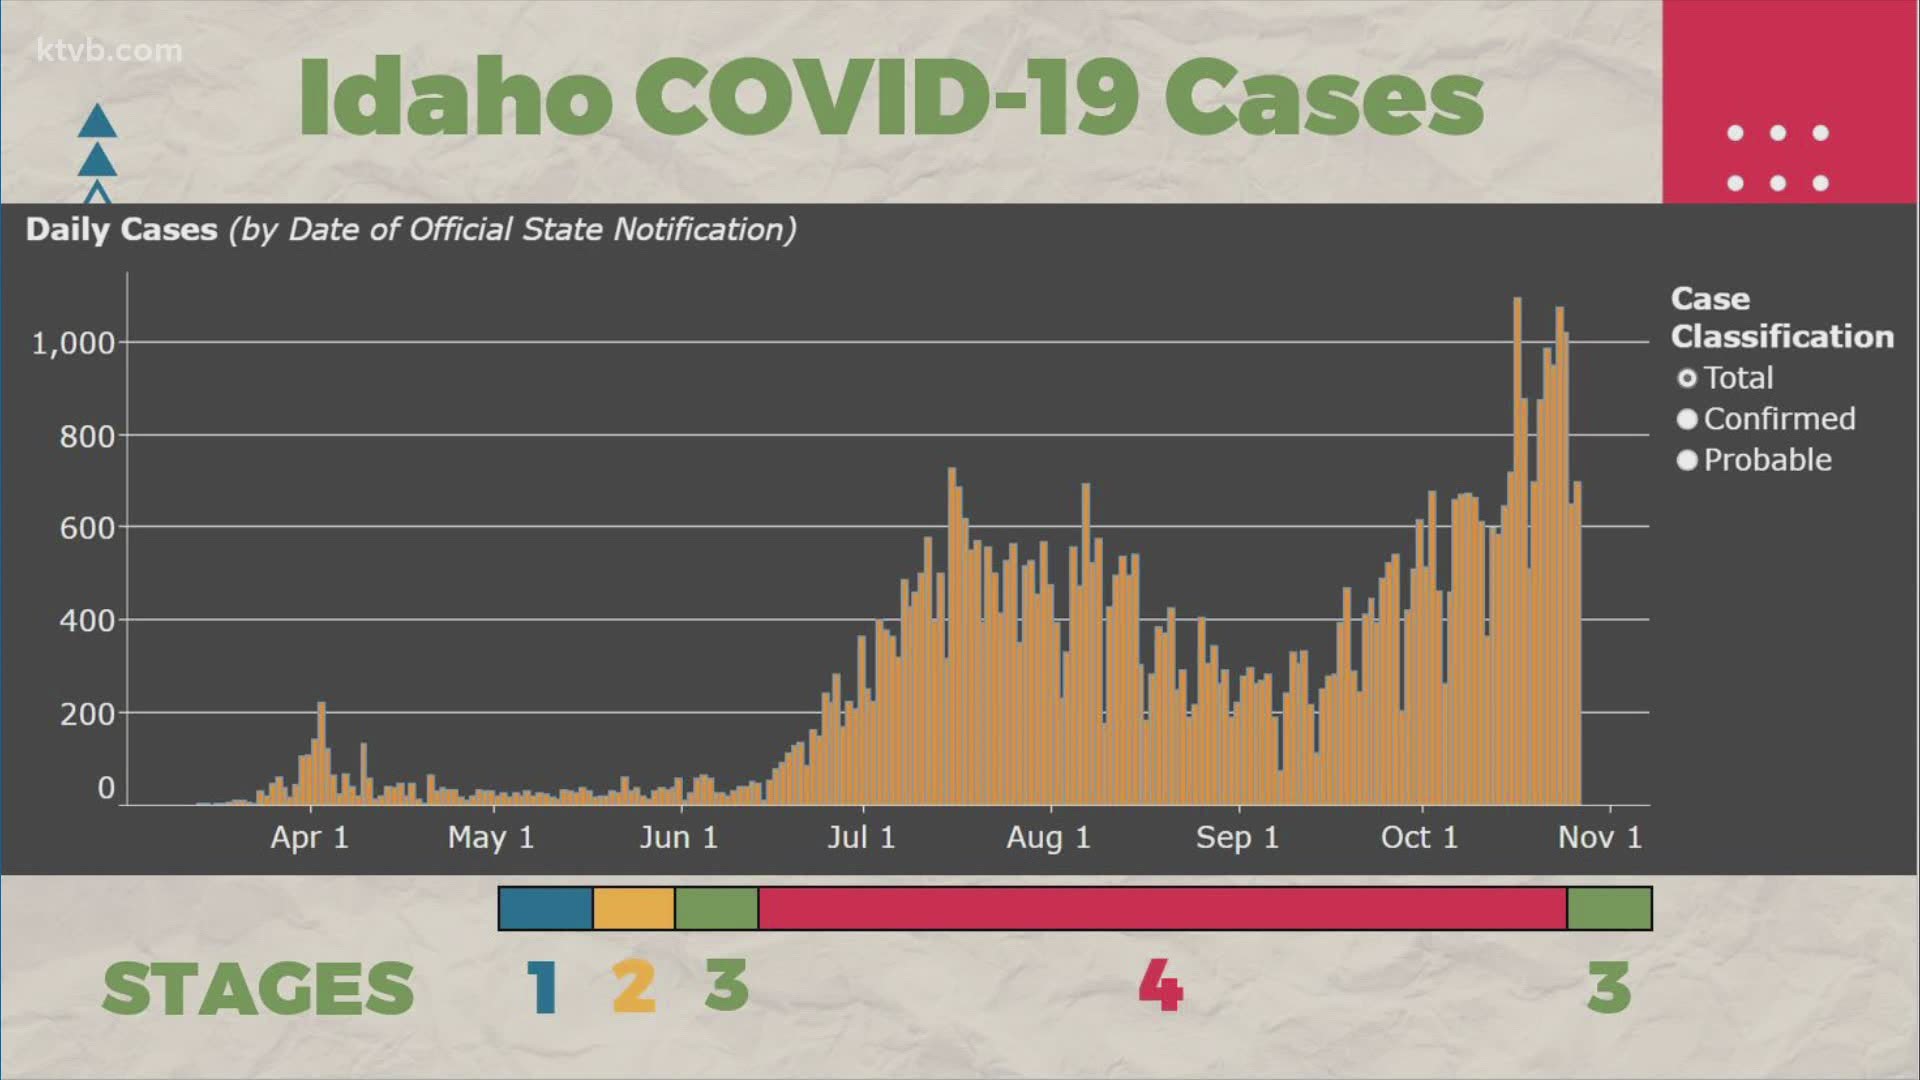 Idaho was rolled back to Stage 3 of the state's reopening plan on Monday, but with cases steadily rising for weeks prior, why now?